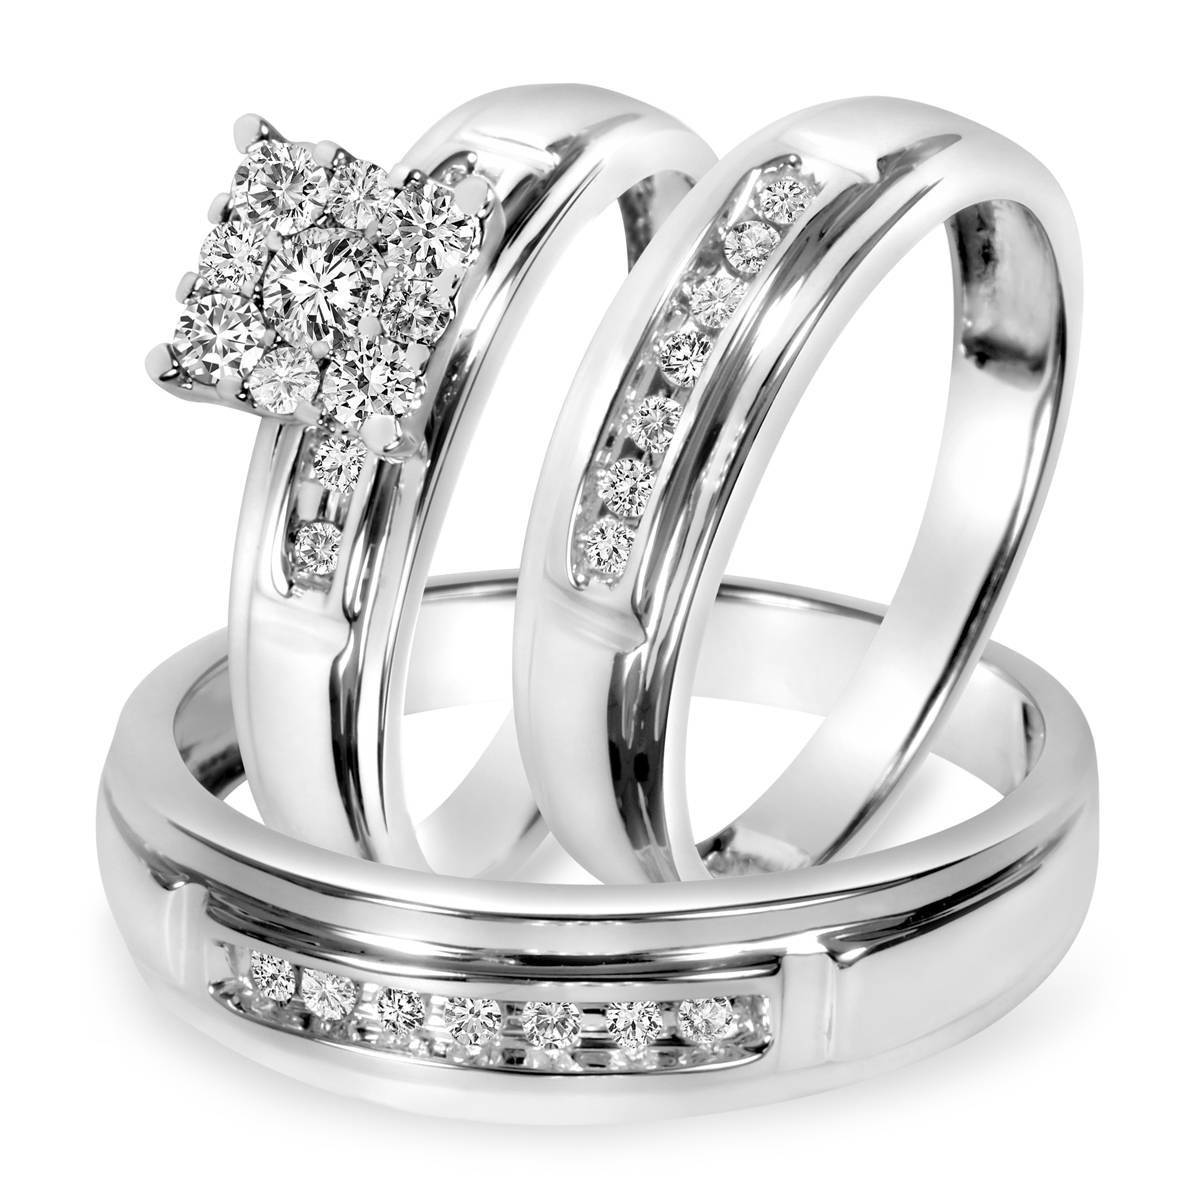 Cheap Wedding Rings Sets
 15 Inspirations of Cheap Wedding Bands Sets His And Hers